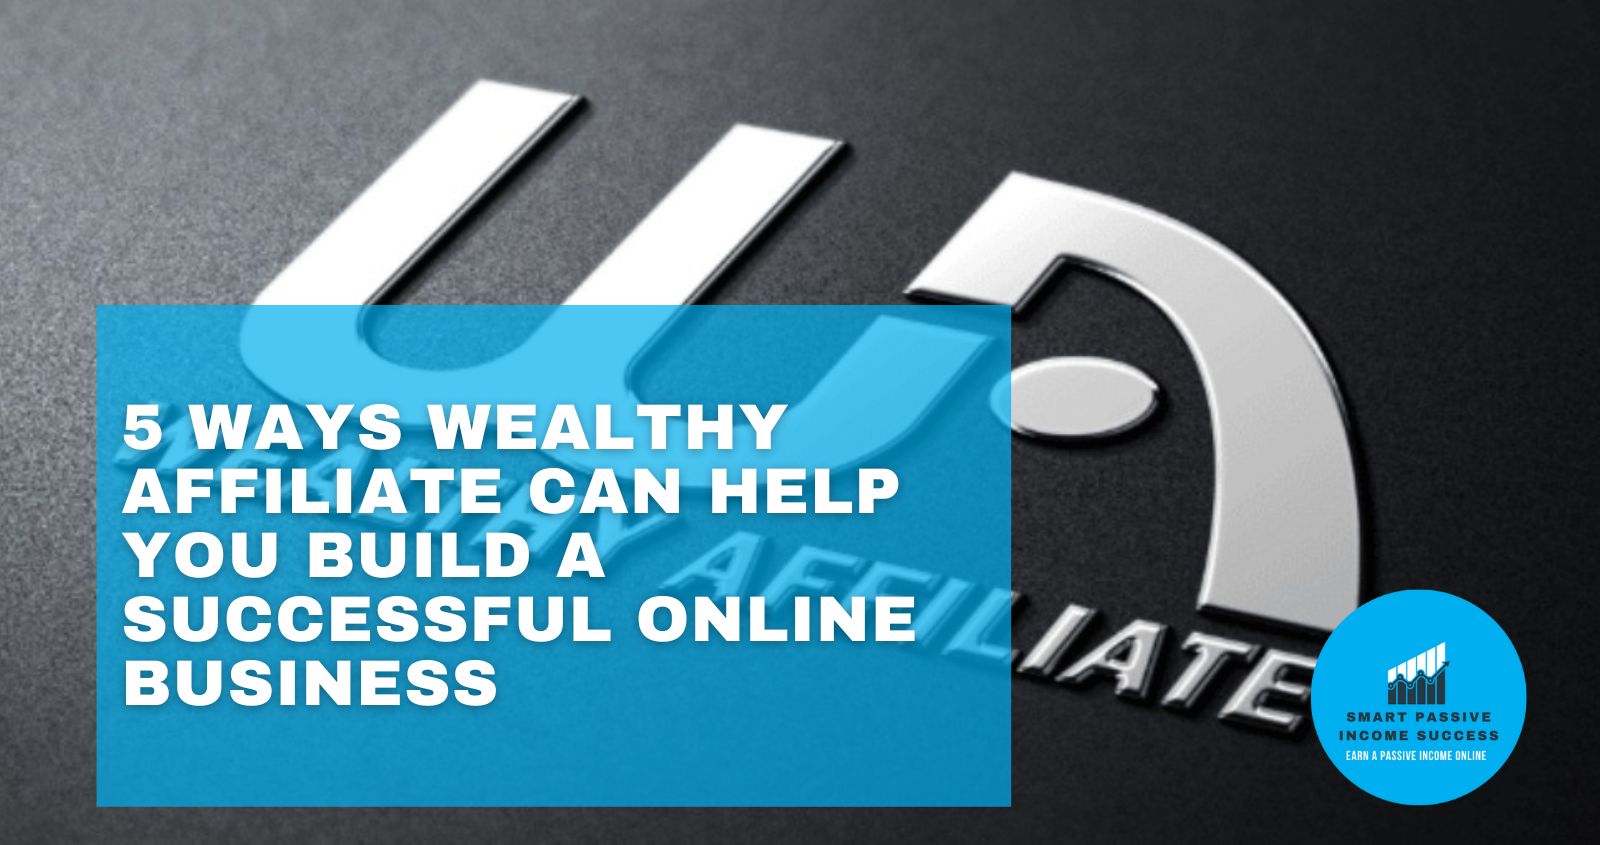 wealthy-affiliate-can-help-you-build-a-successful-online-business-featured-image